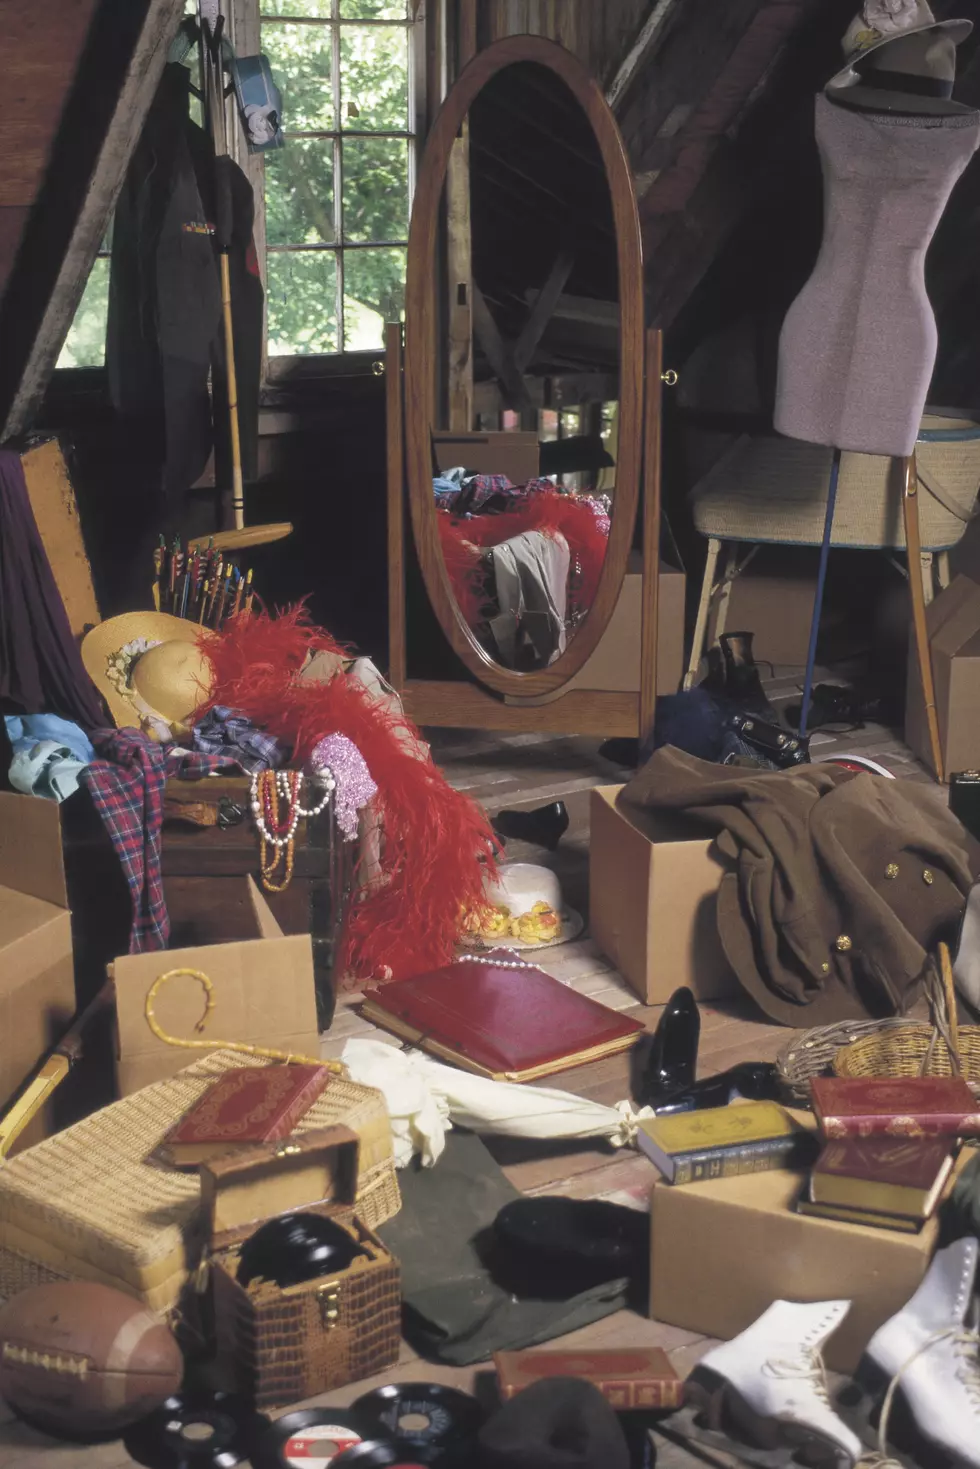 Are You a Compulsive Hoarder?  Here’s How to Get Help